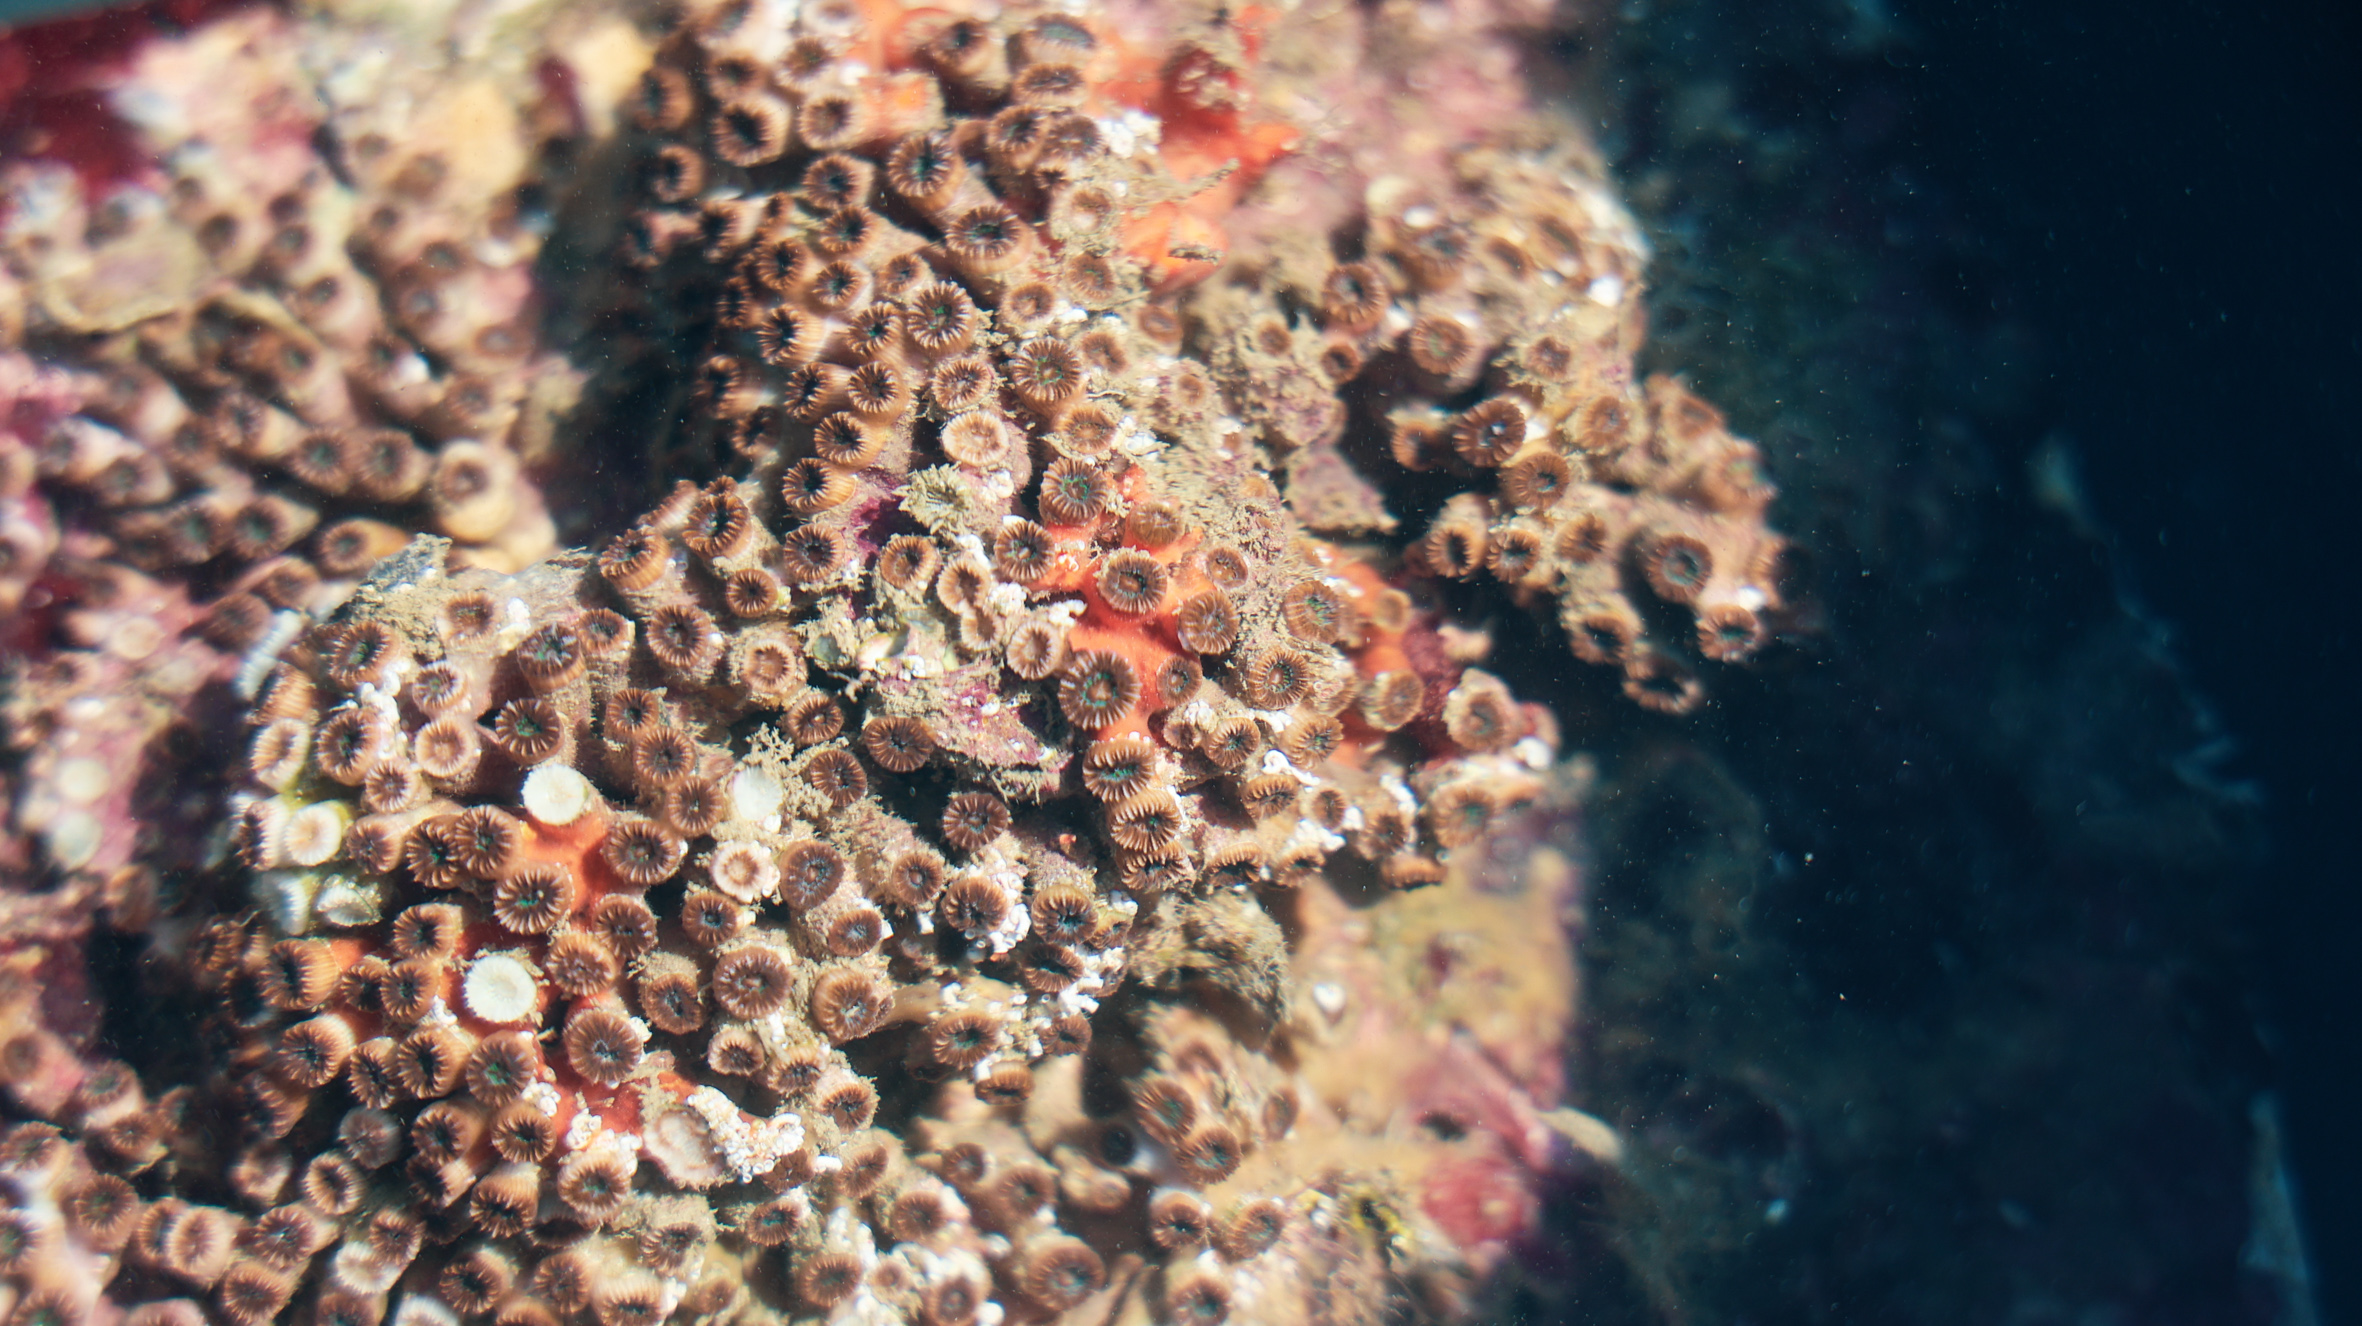 Translocating endangered coral colonies at the Grand Harbour